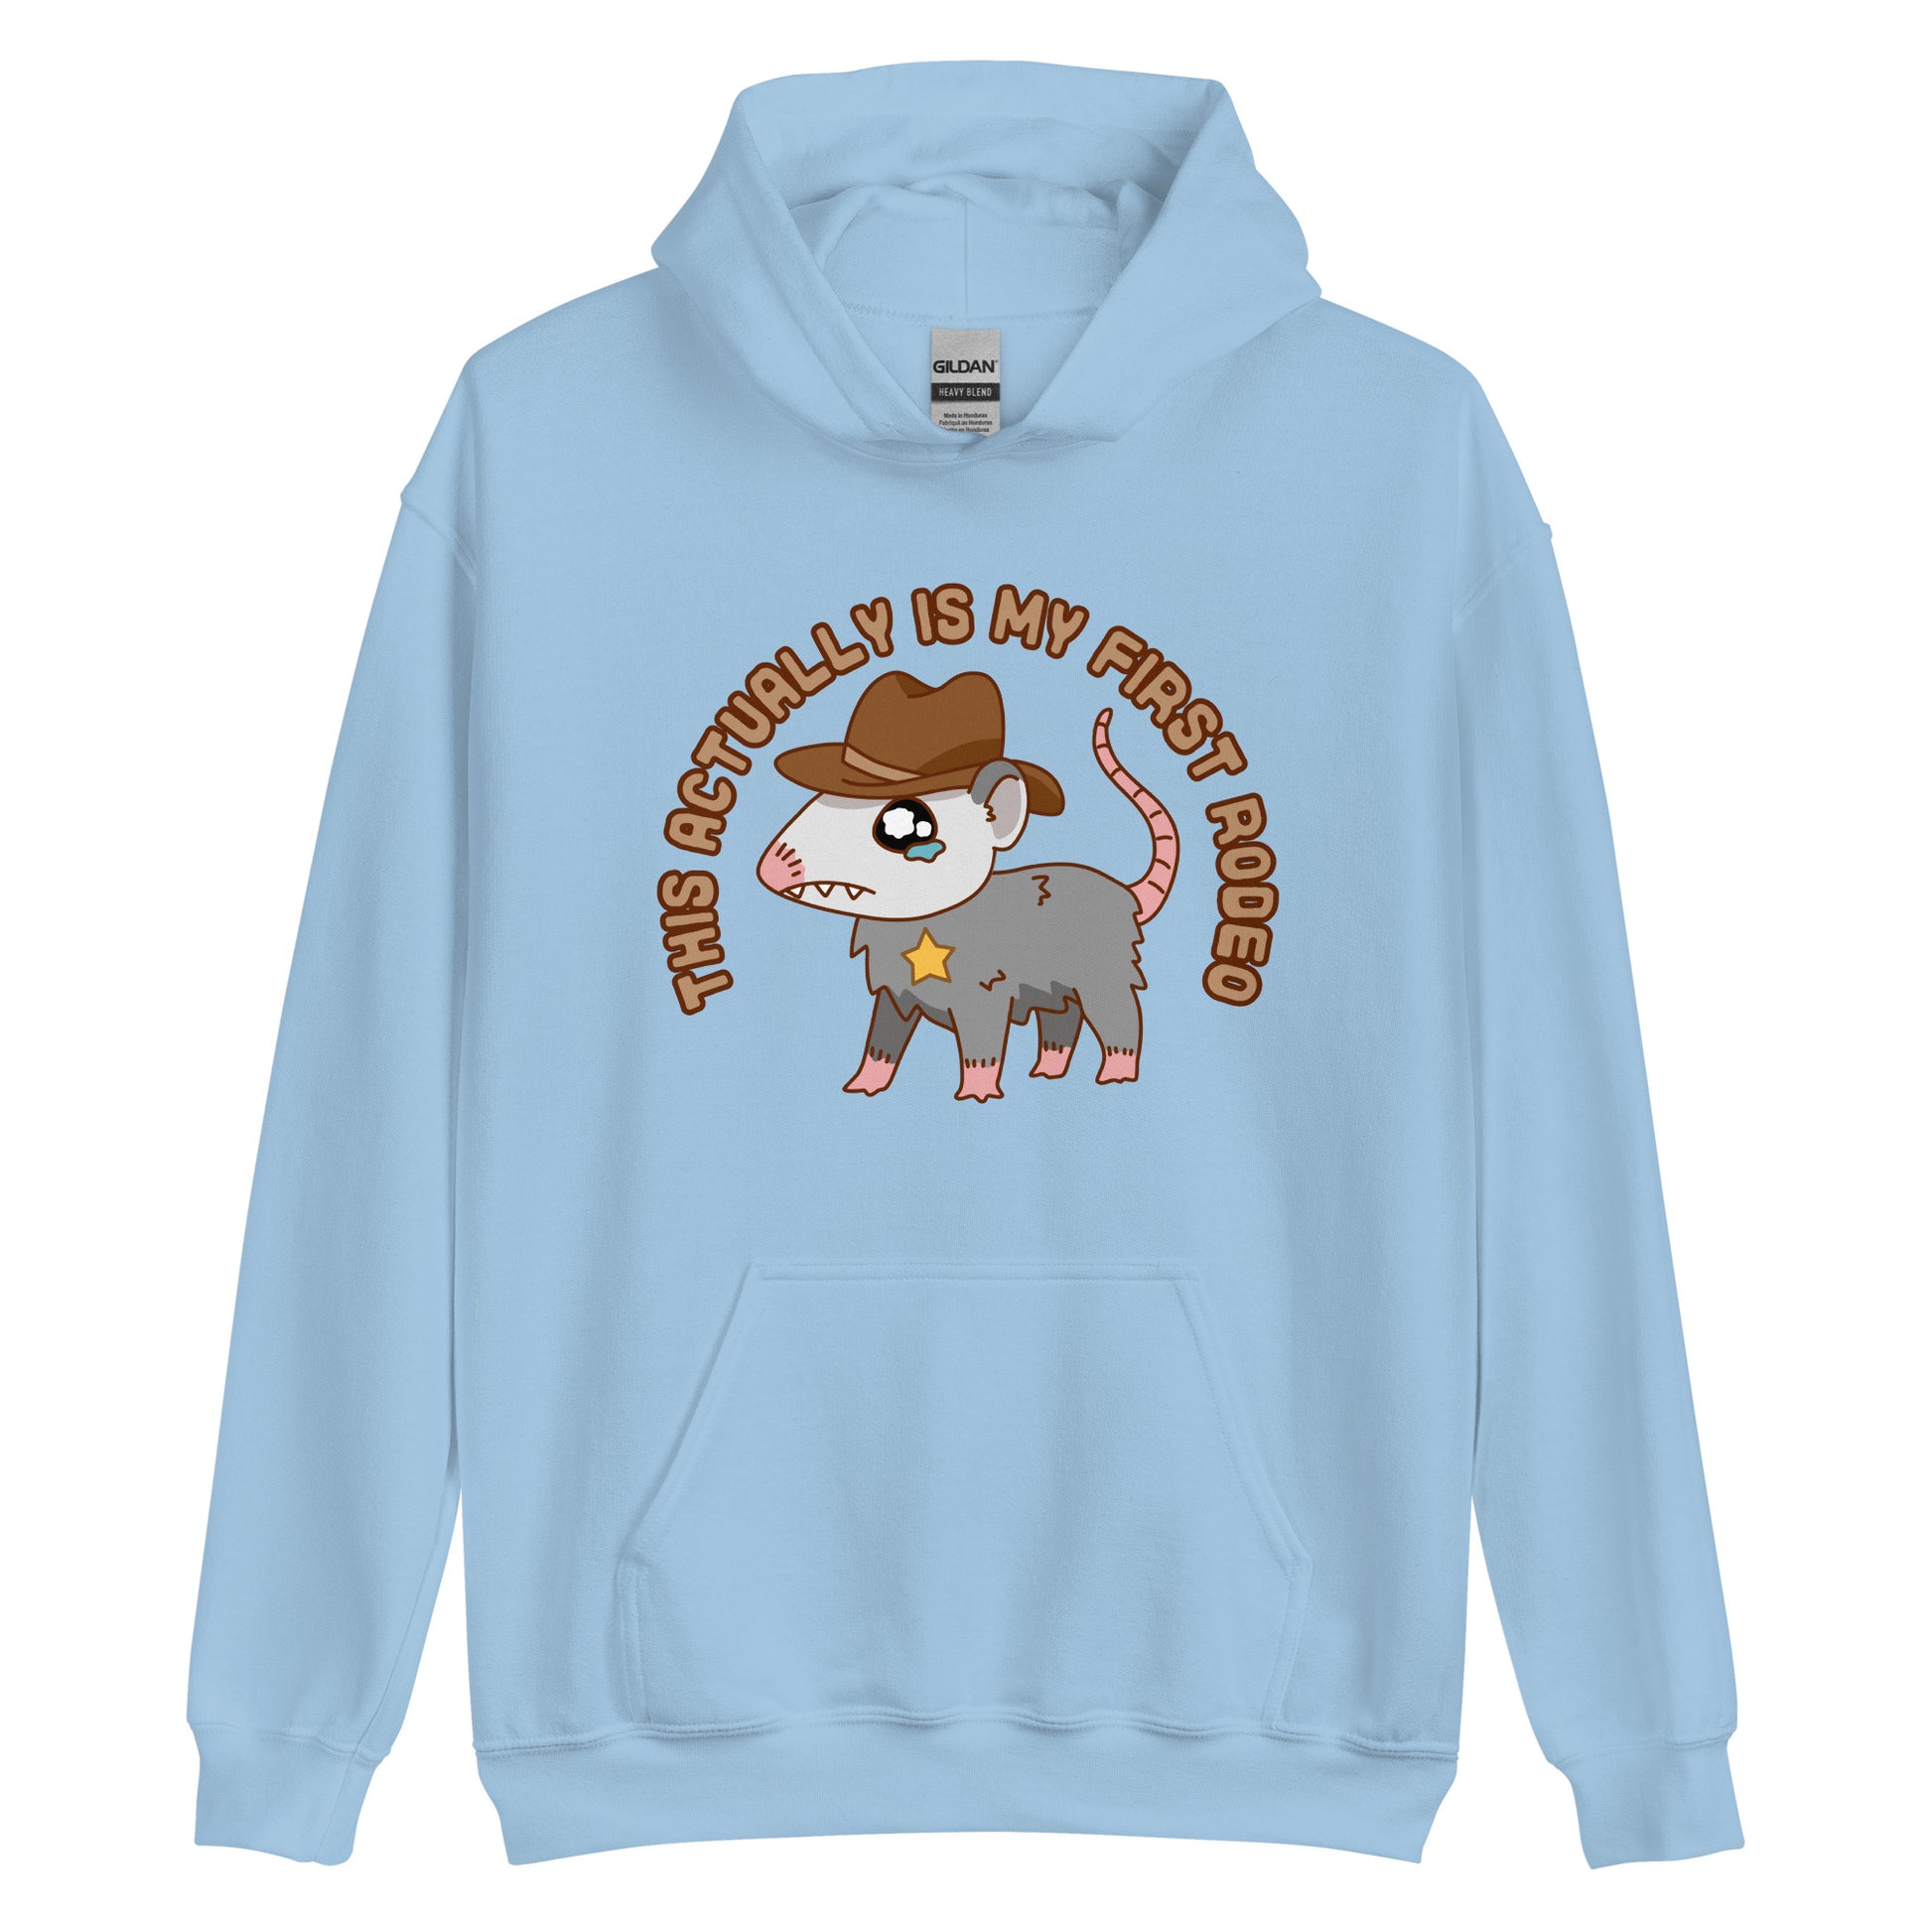 A light blue hooded sweatshirt featuring an illustration of a cute and nervous possum wearing a cowboy hat and sherrif's star badge. Text above the possum in an arc reads "this actually is my first rodeo".